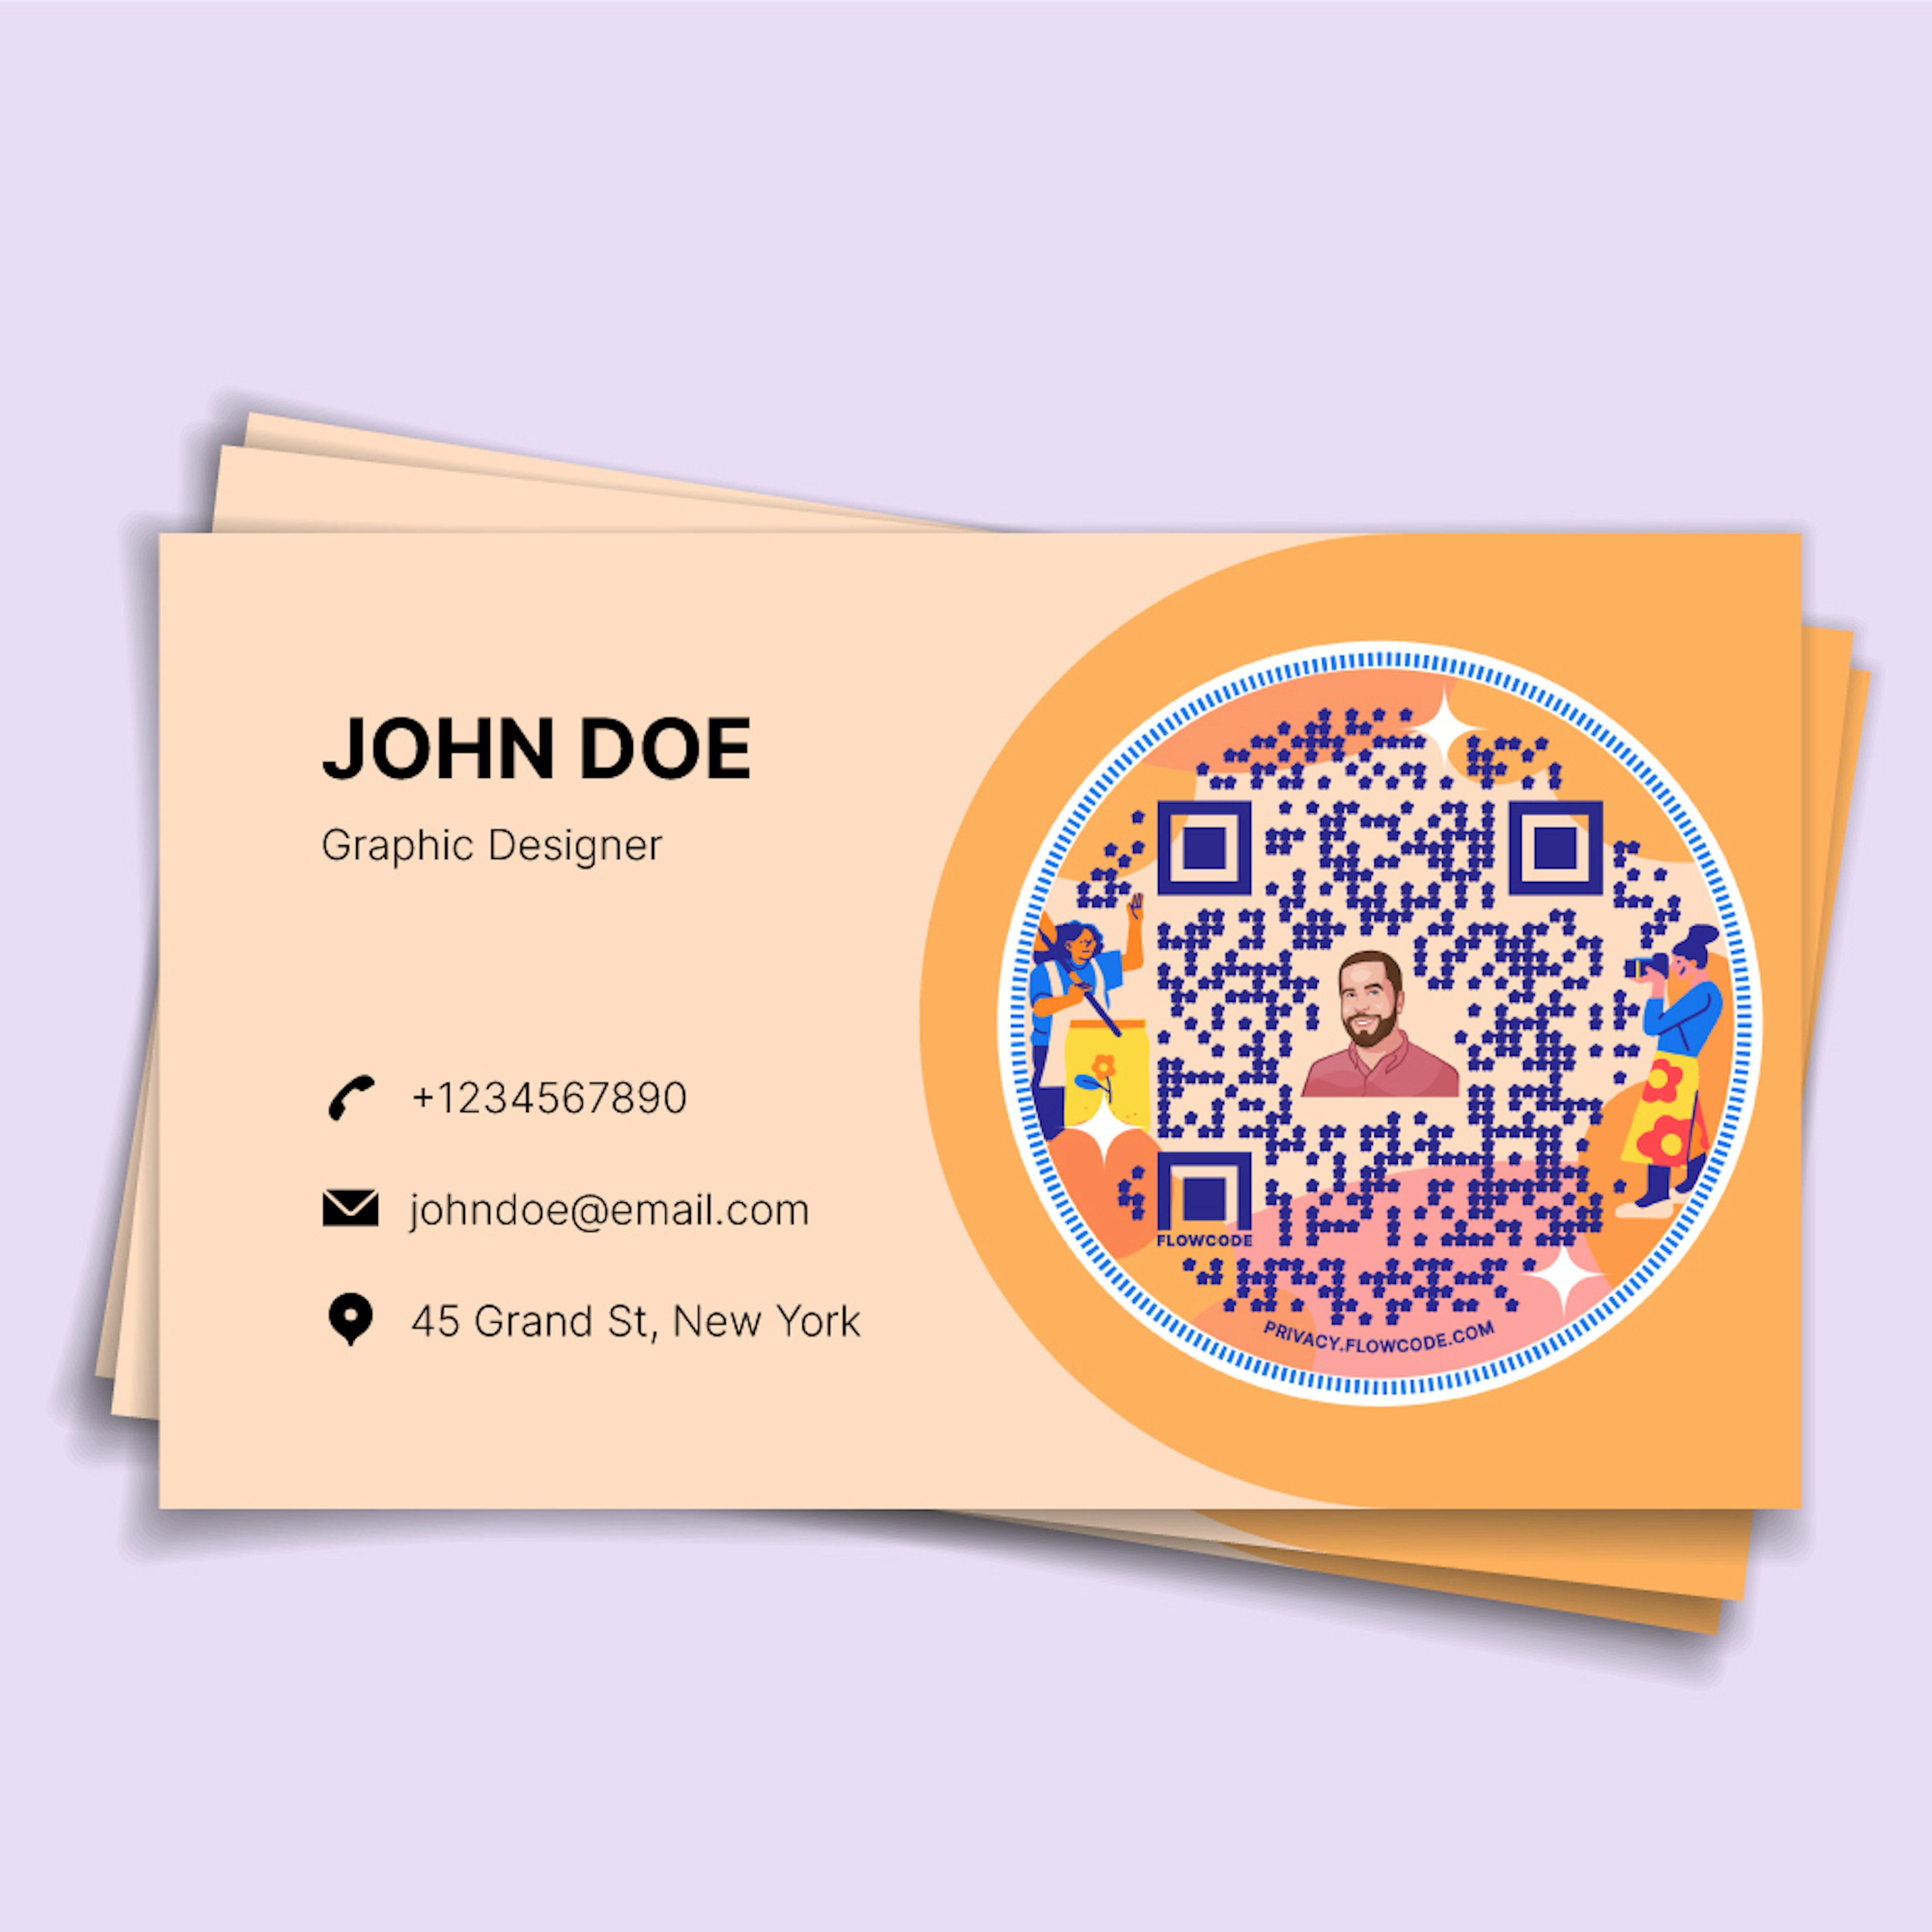 QR code business cards